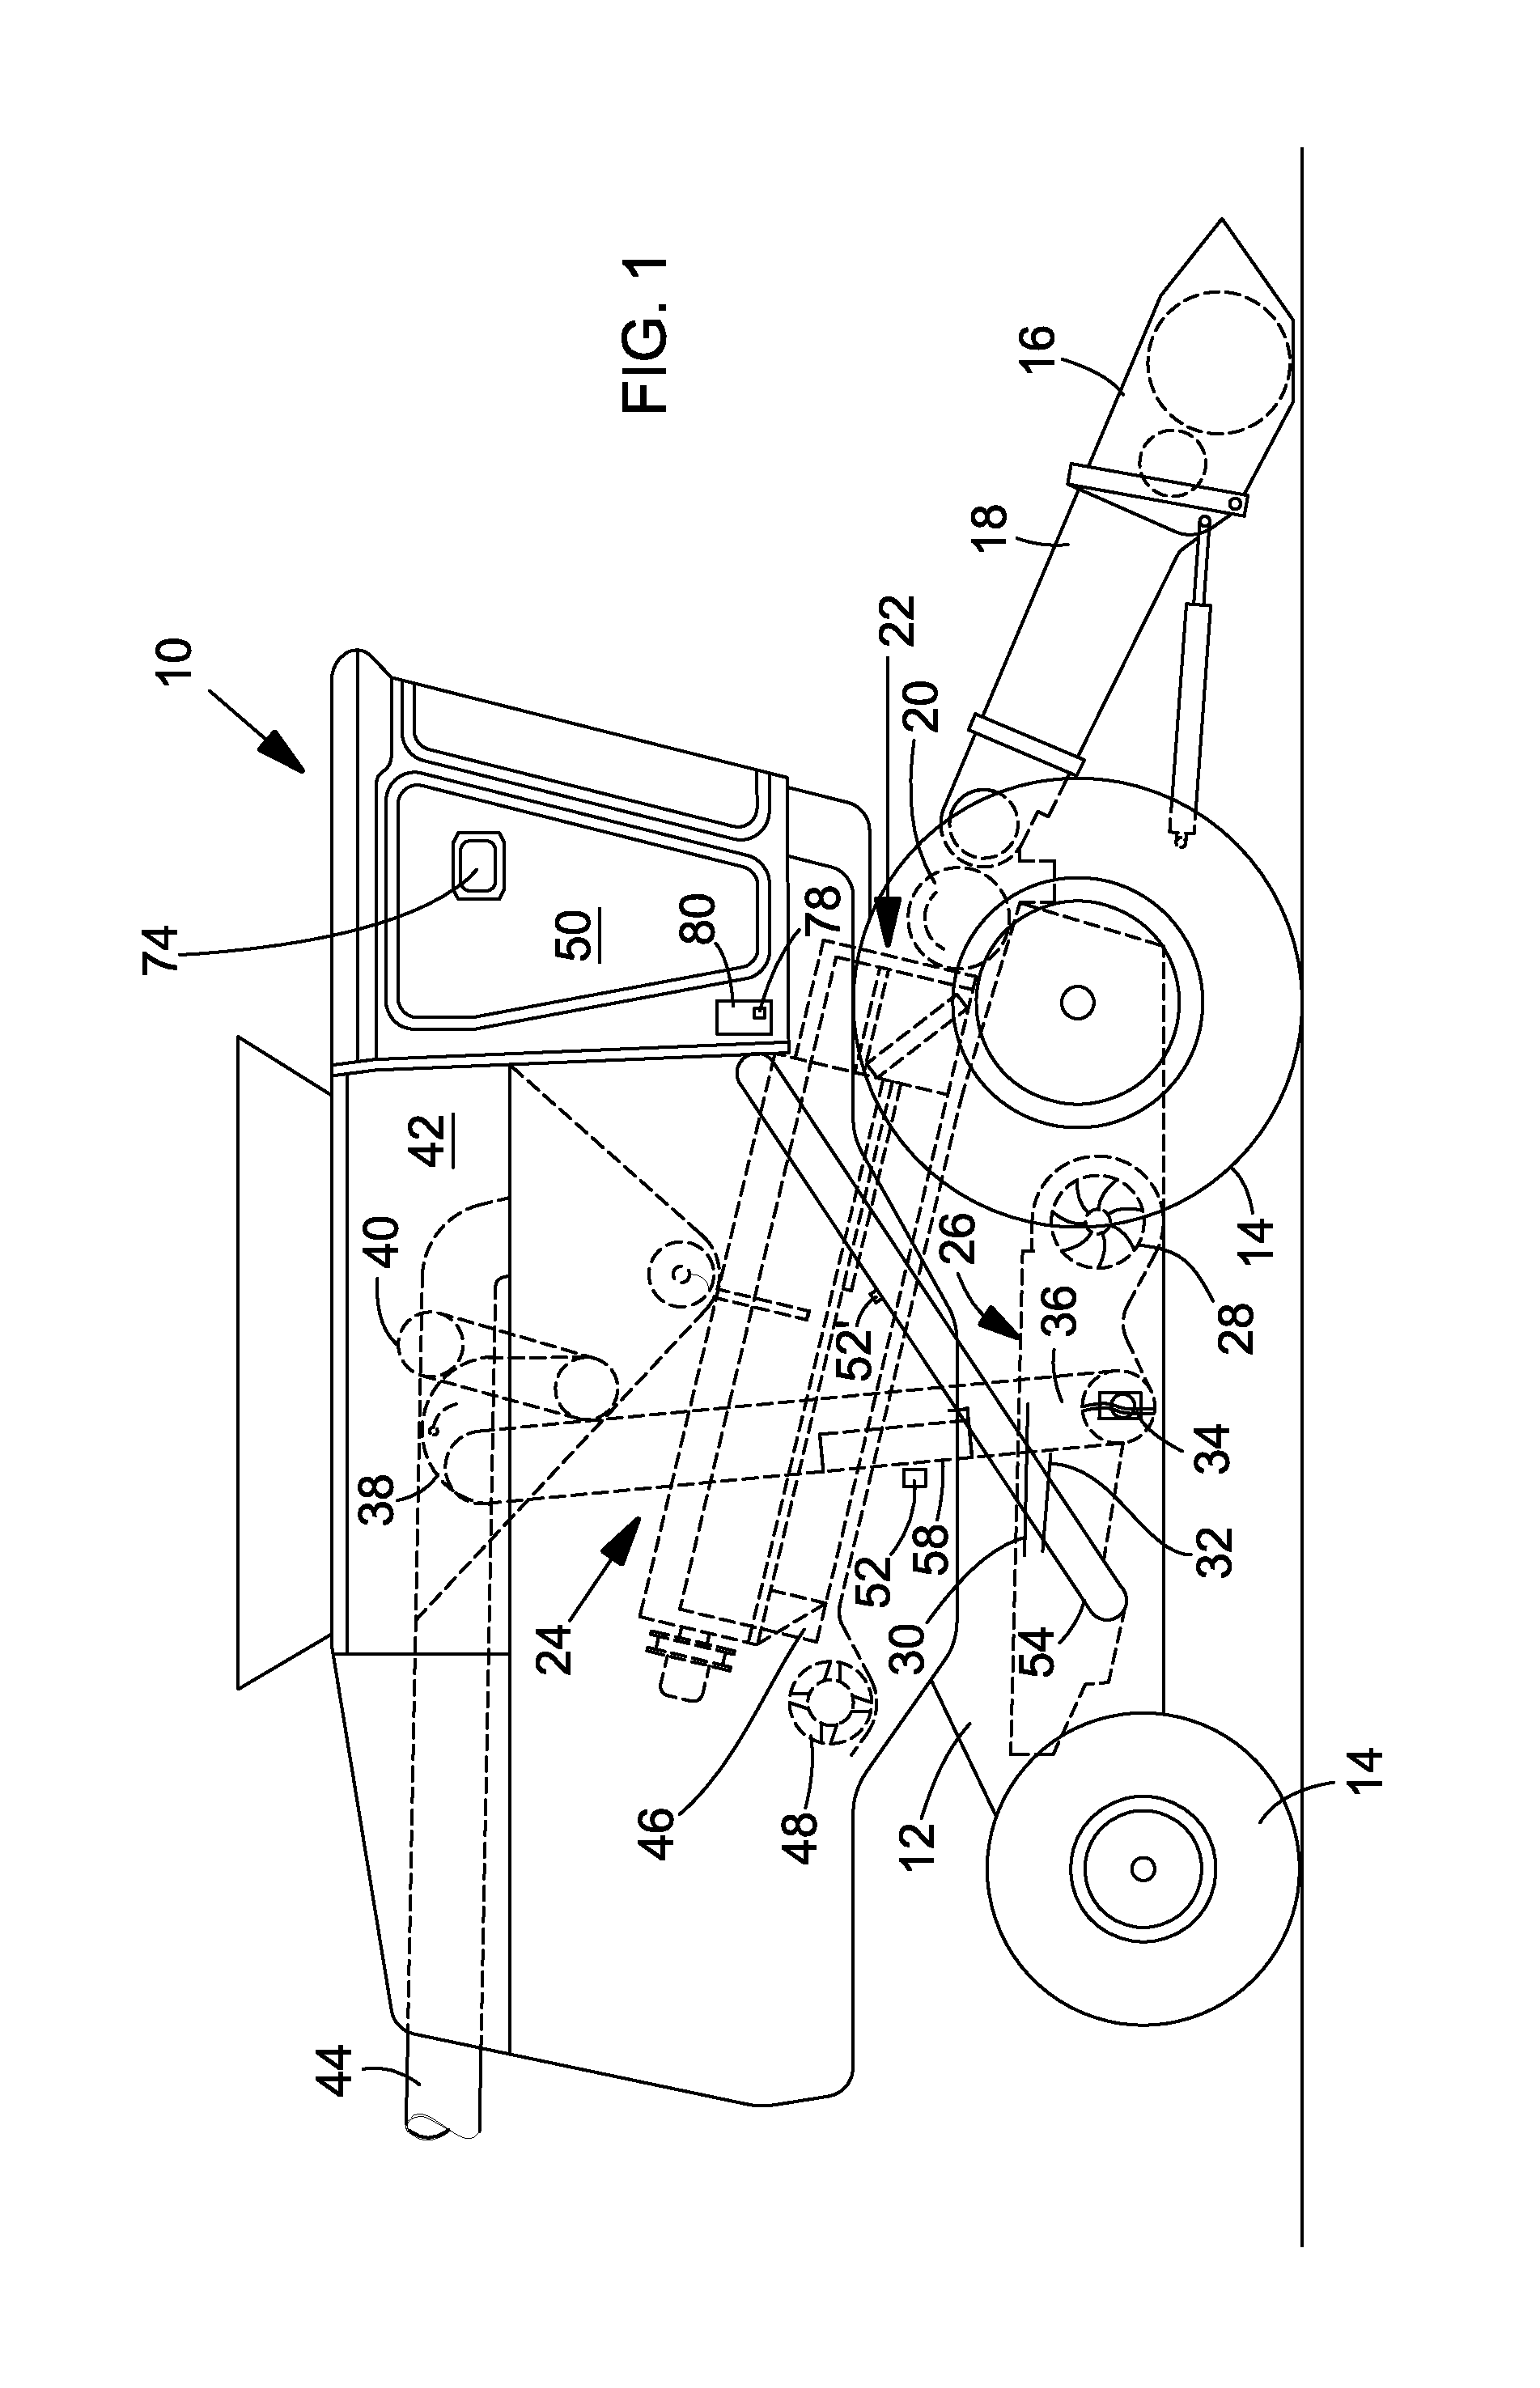 Method and apparatus for the optical evaluation of harvested crop in a harvesting machine